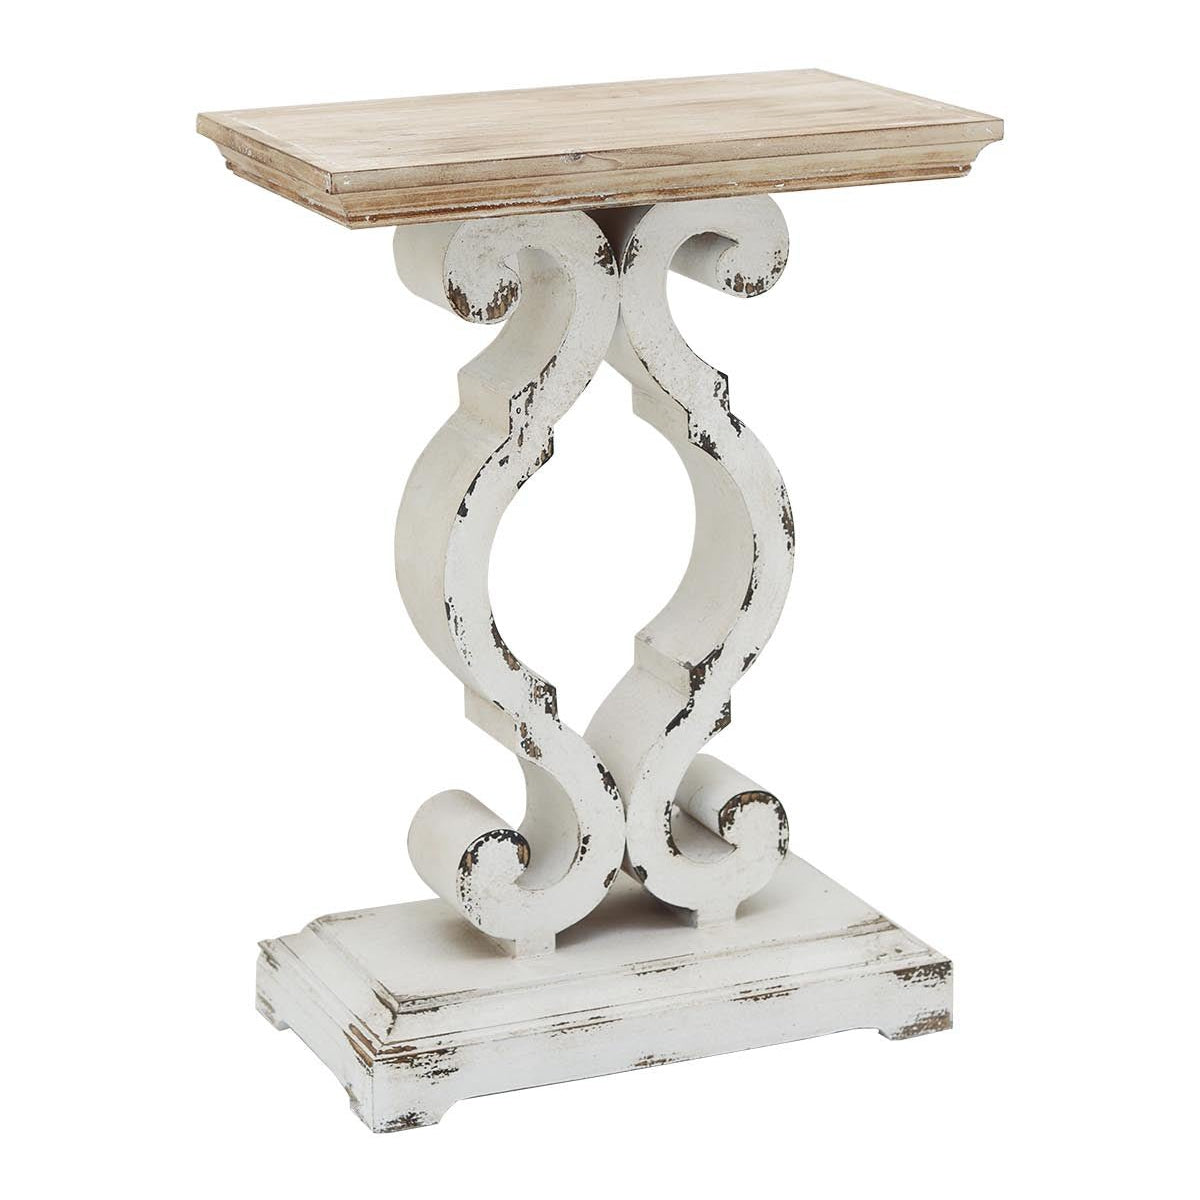 Natural Wood Rustic Wood Farmhouse End Table - End Tables